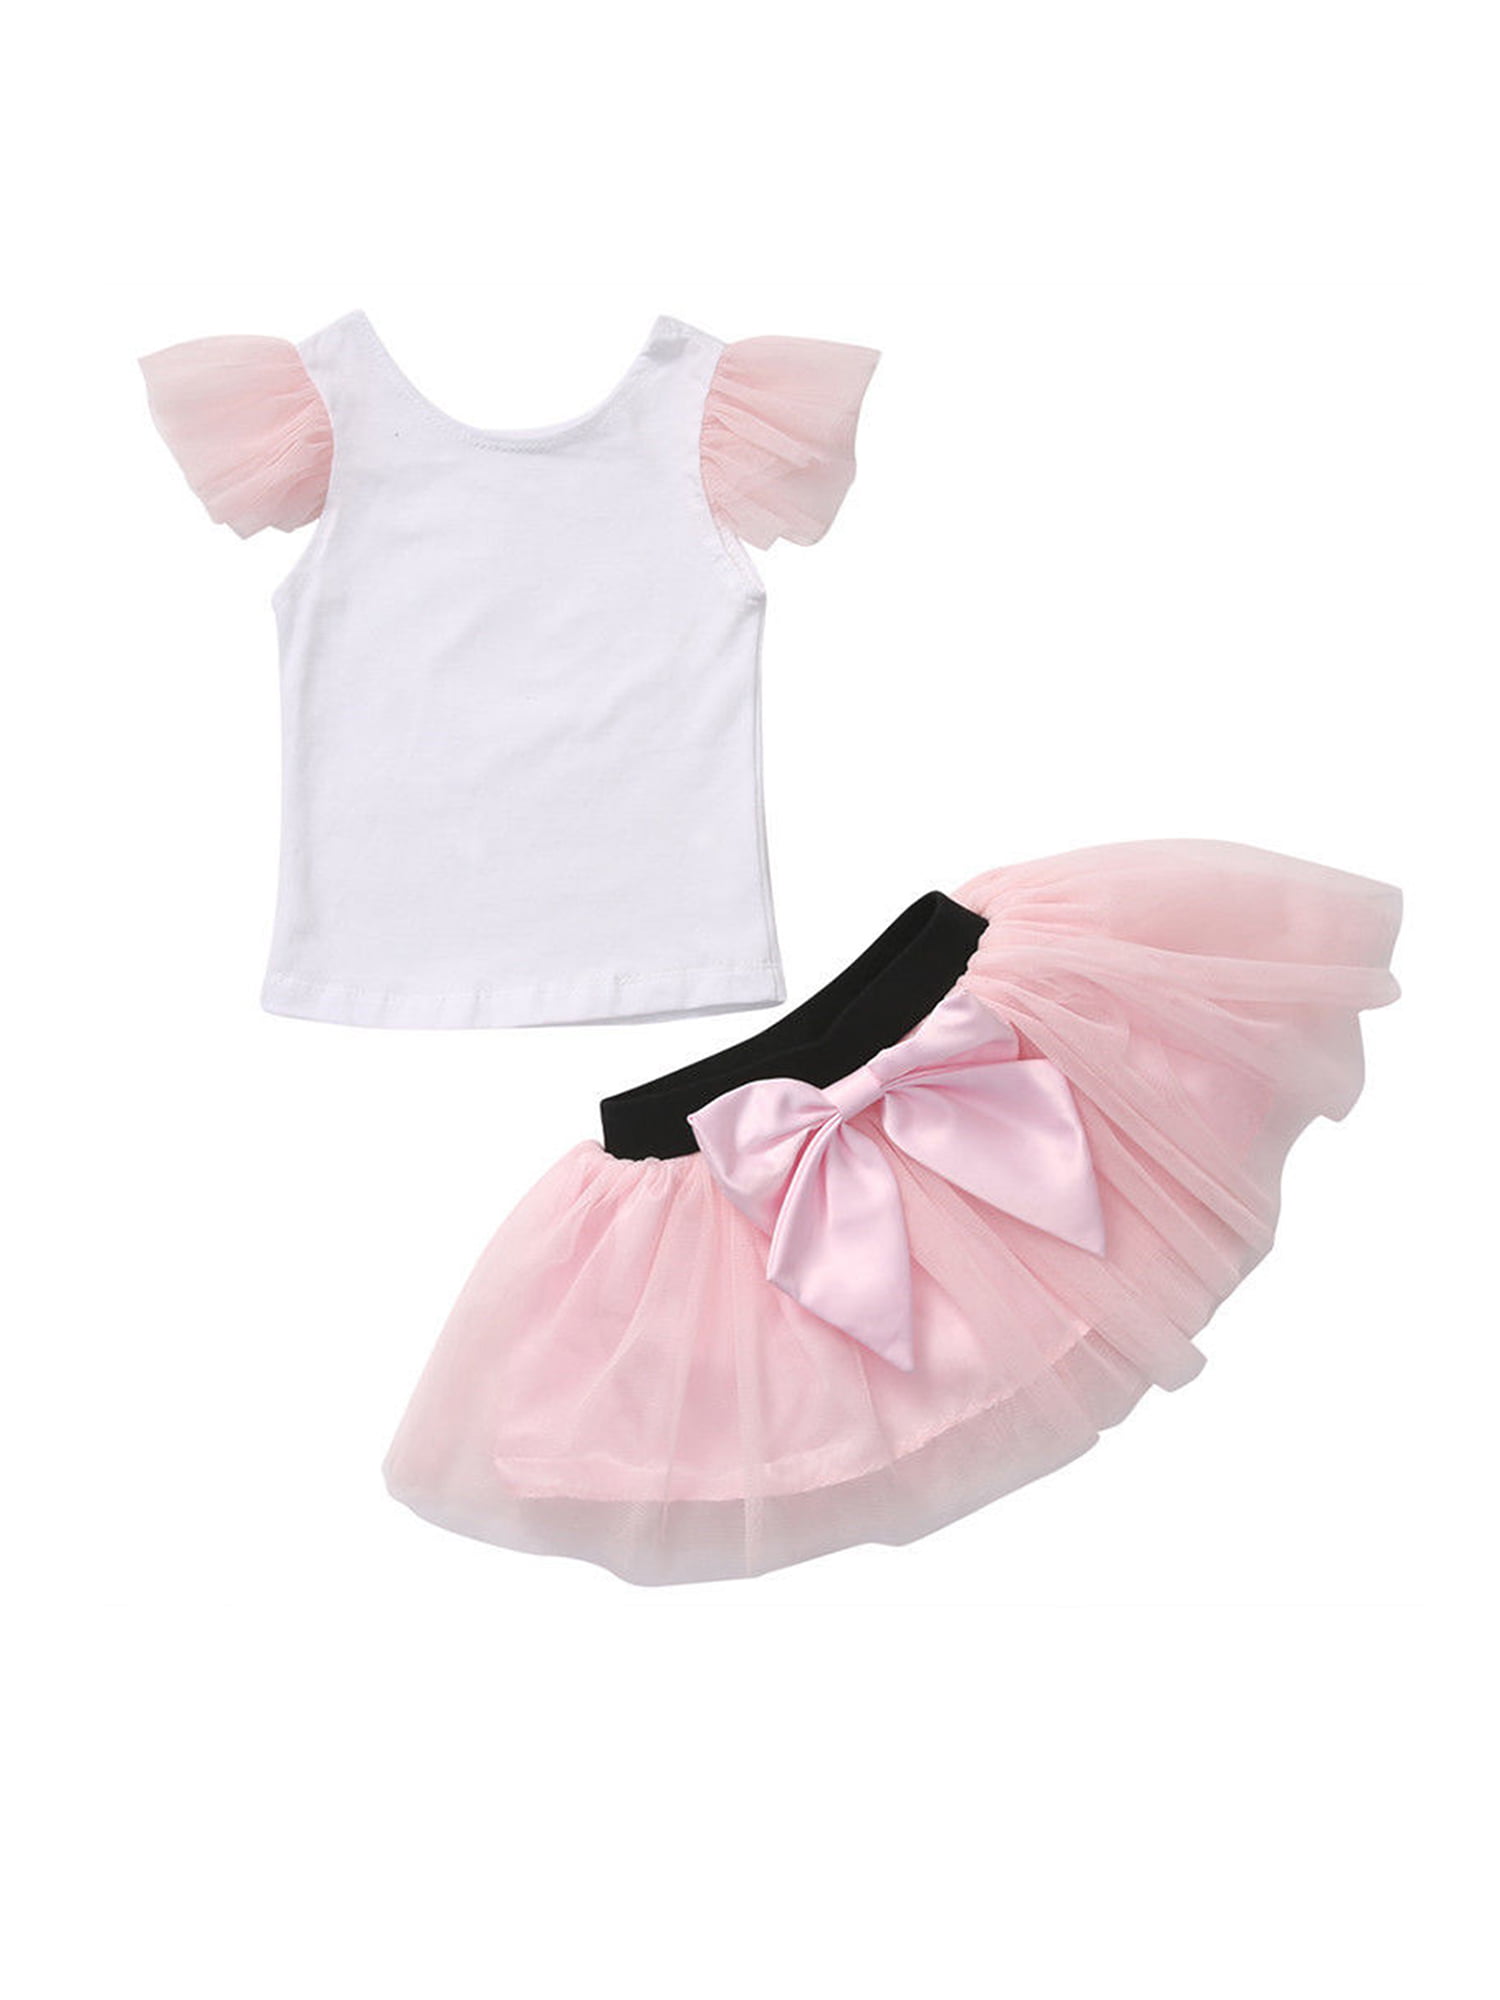 Girls Marry Daddy Top T-Shirt Outfit Tutu Skirt Set Red Bow Valentines Proposal